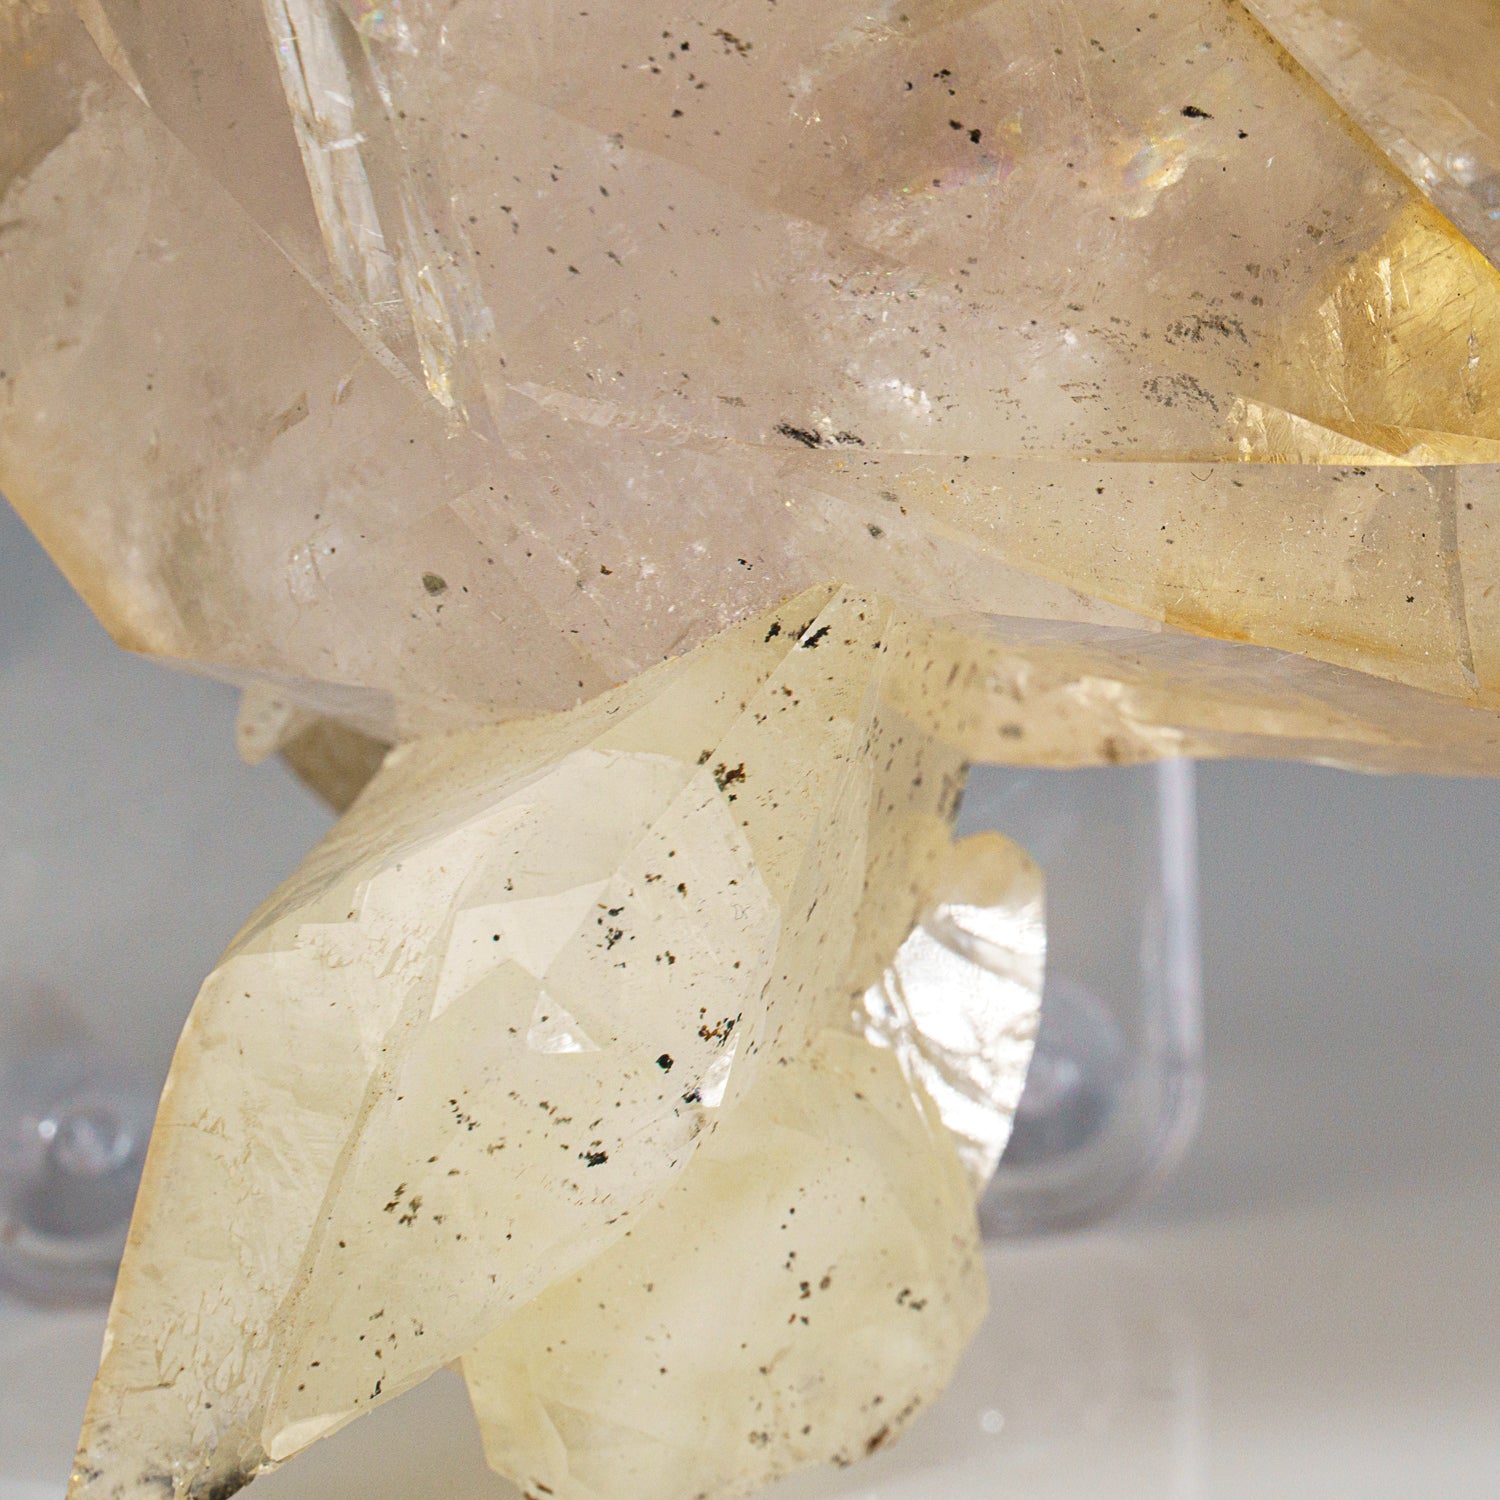 Twinned Golden Calcite Crystal from Elmwood Mine, Tennessee (260.6 grams)